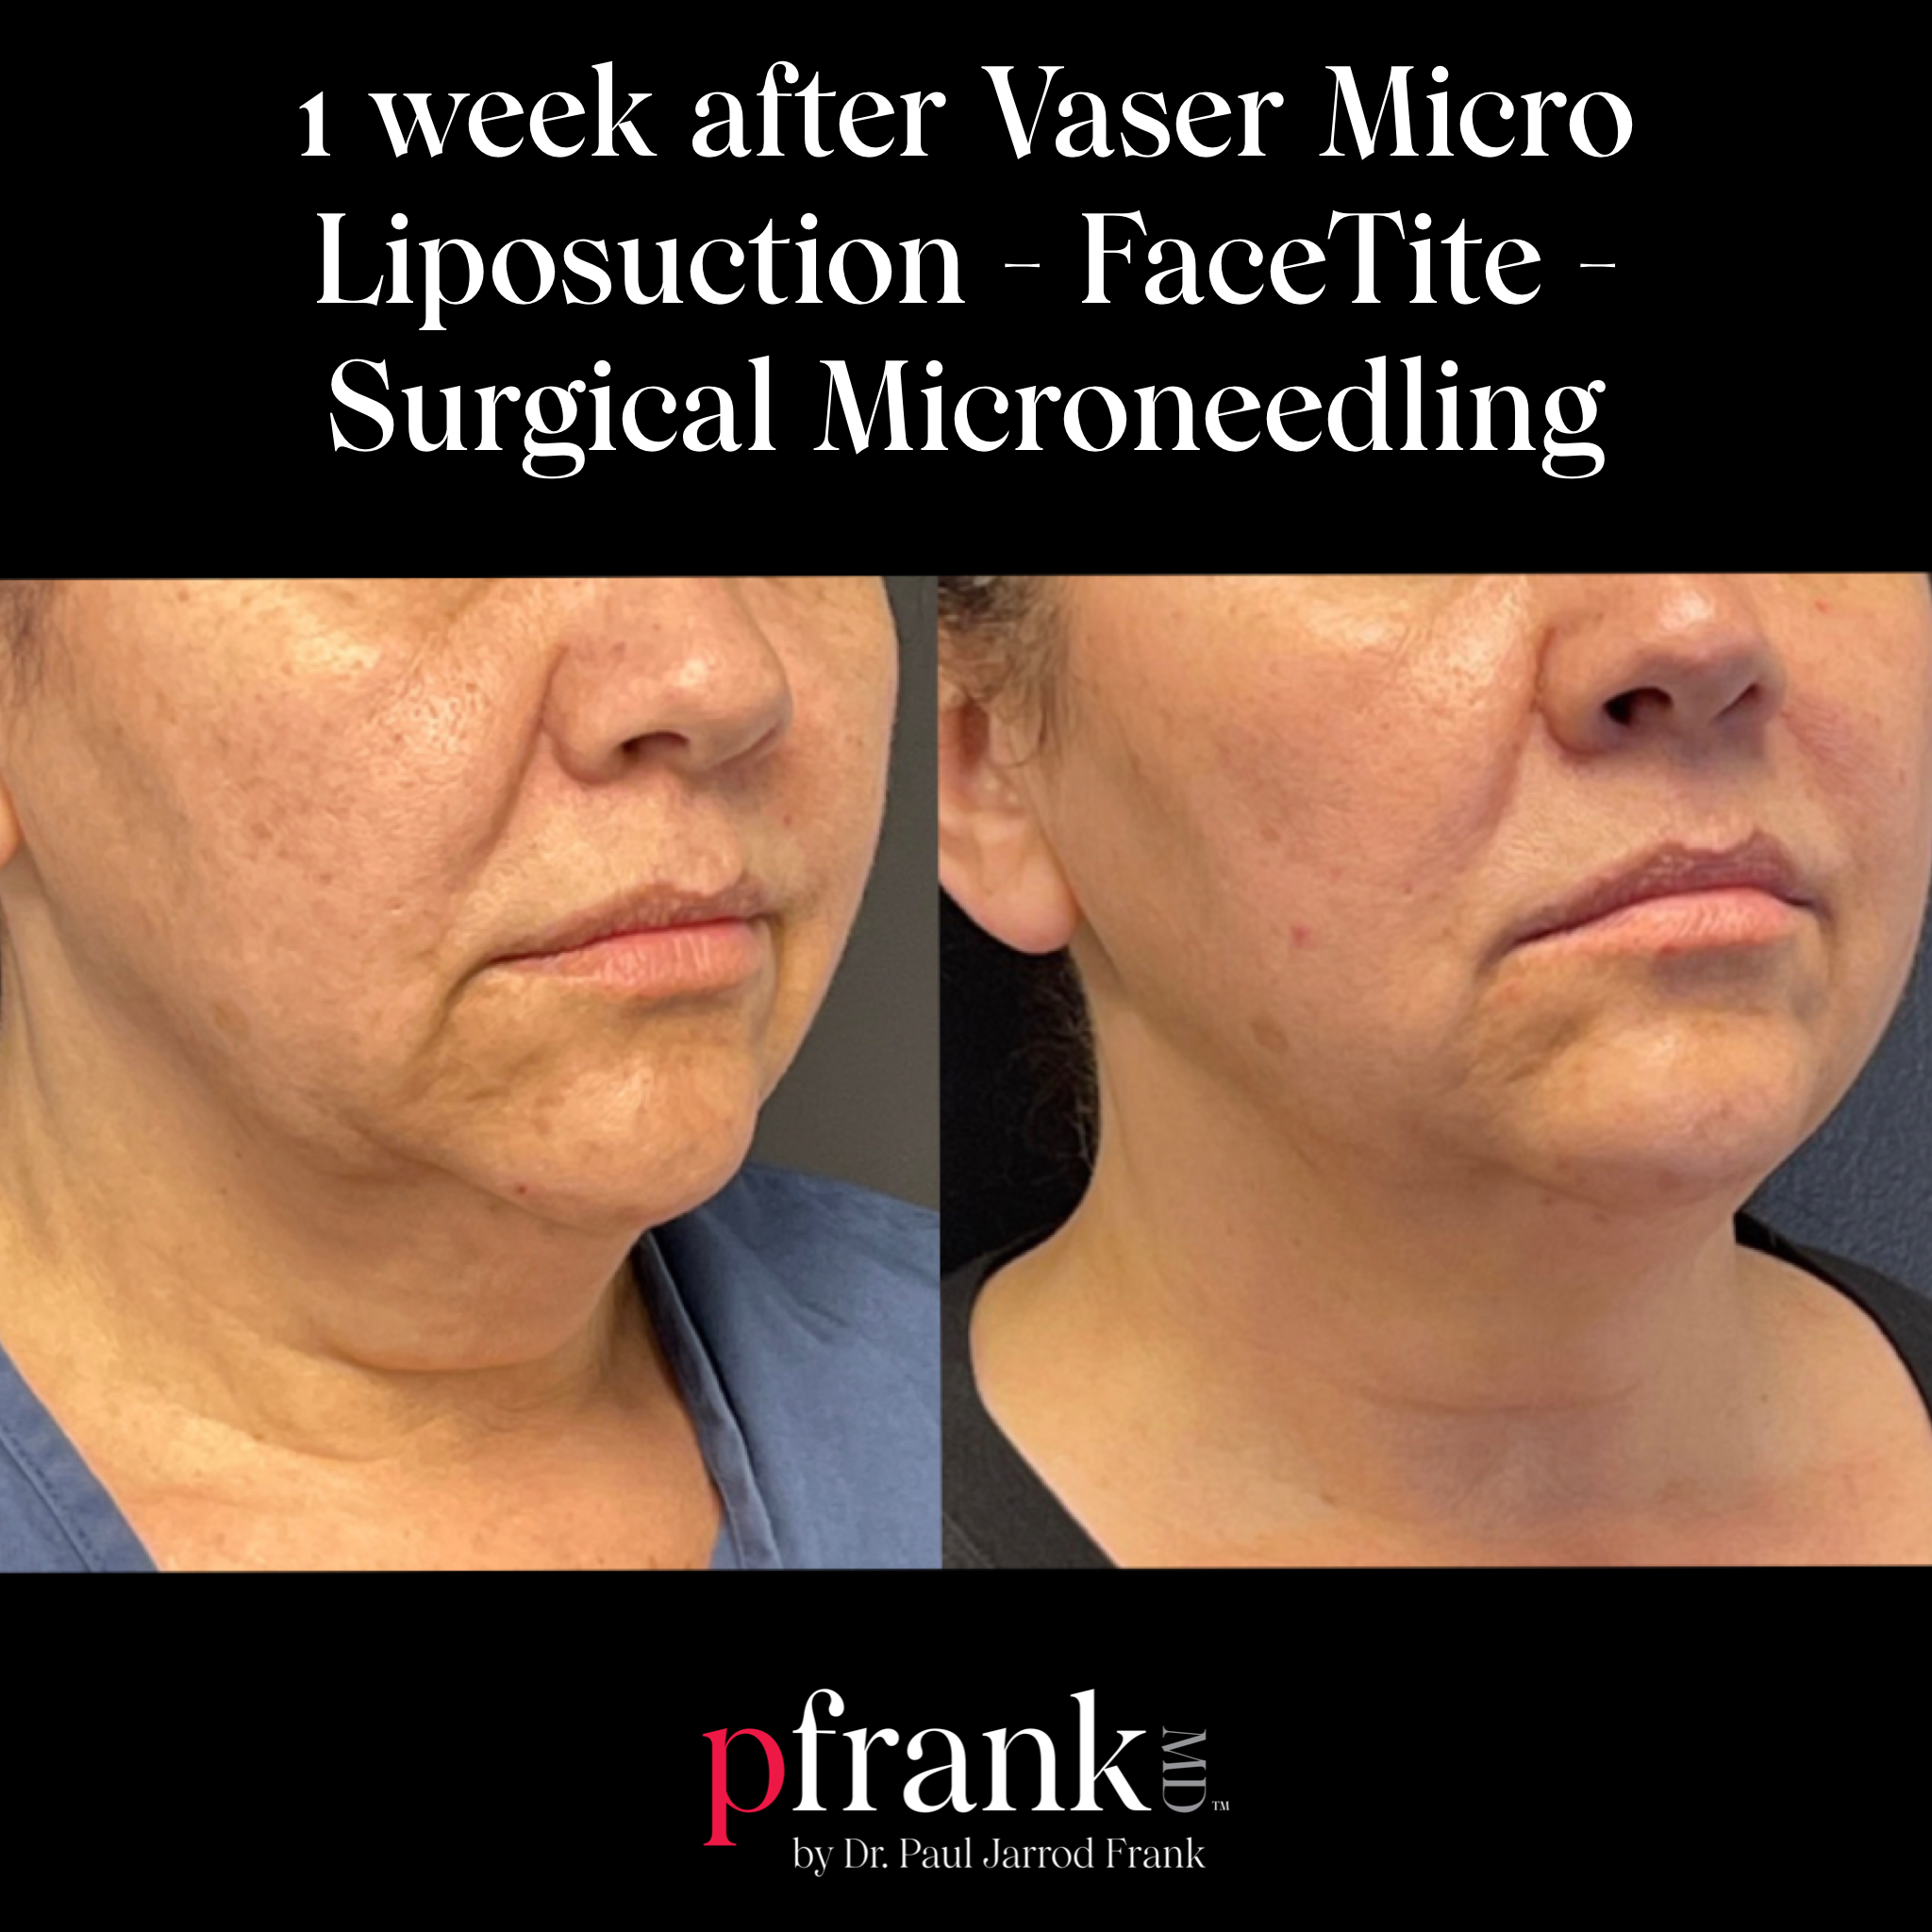 Vaser Micro Liposuction Facetite Surgical Microneedling Before and After Results